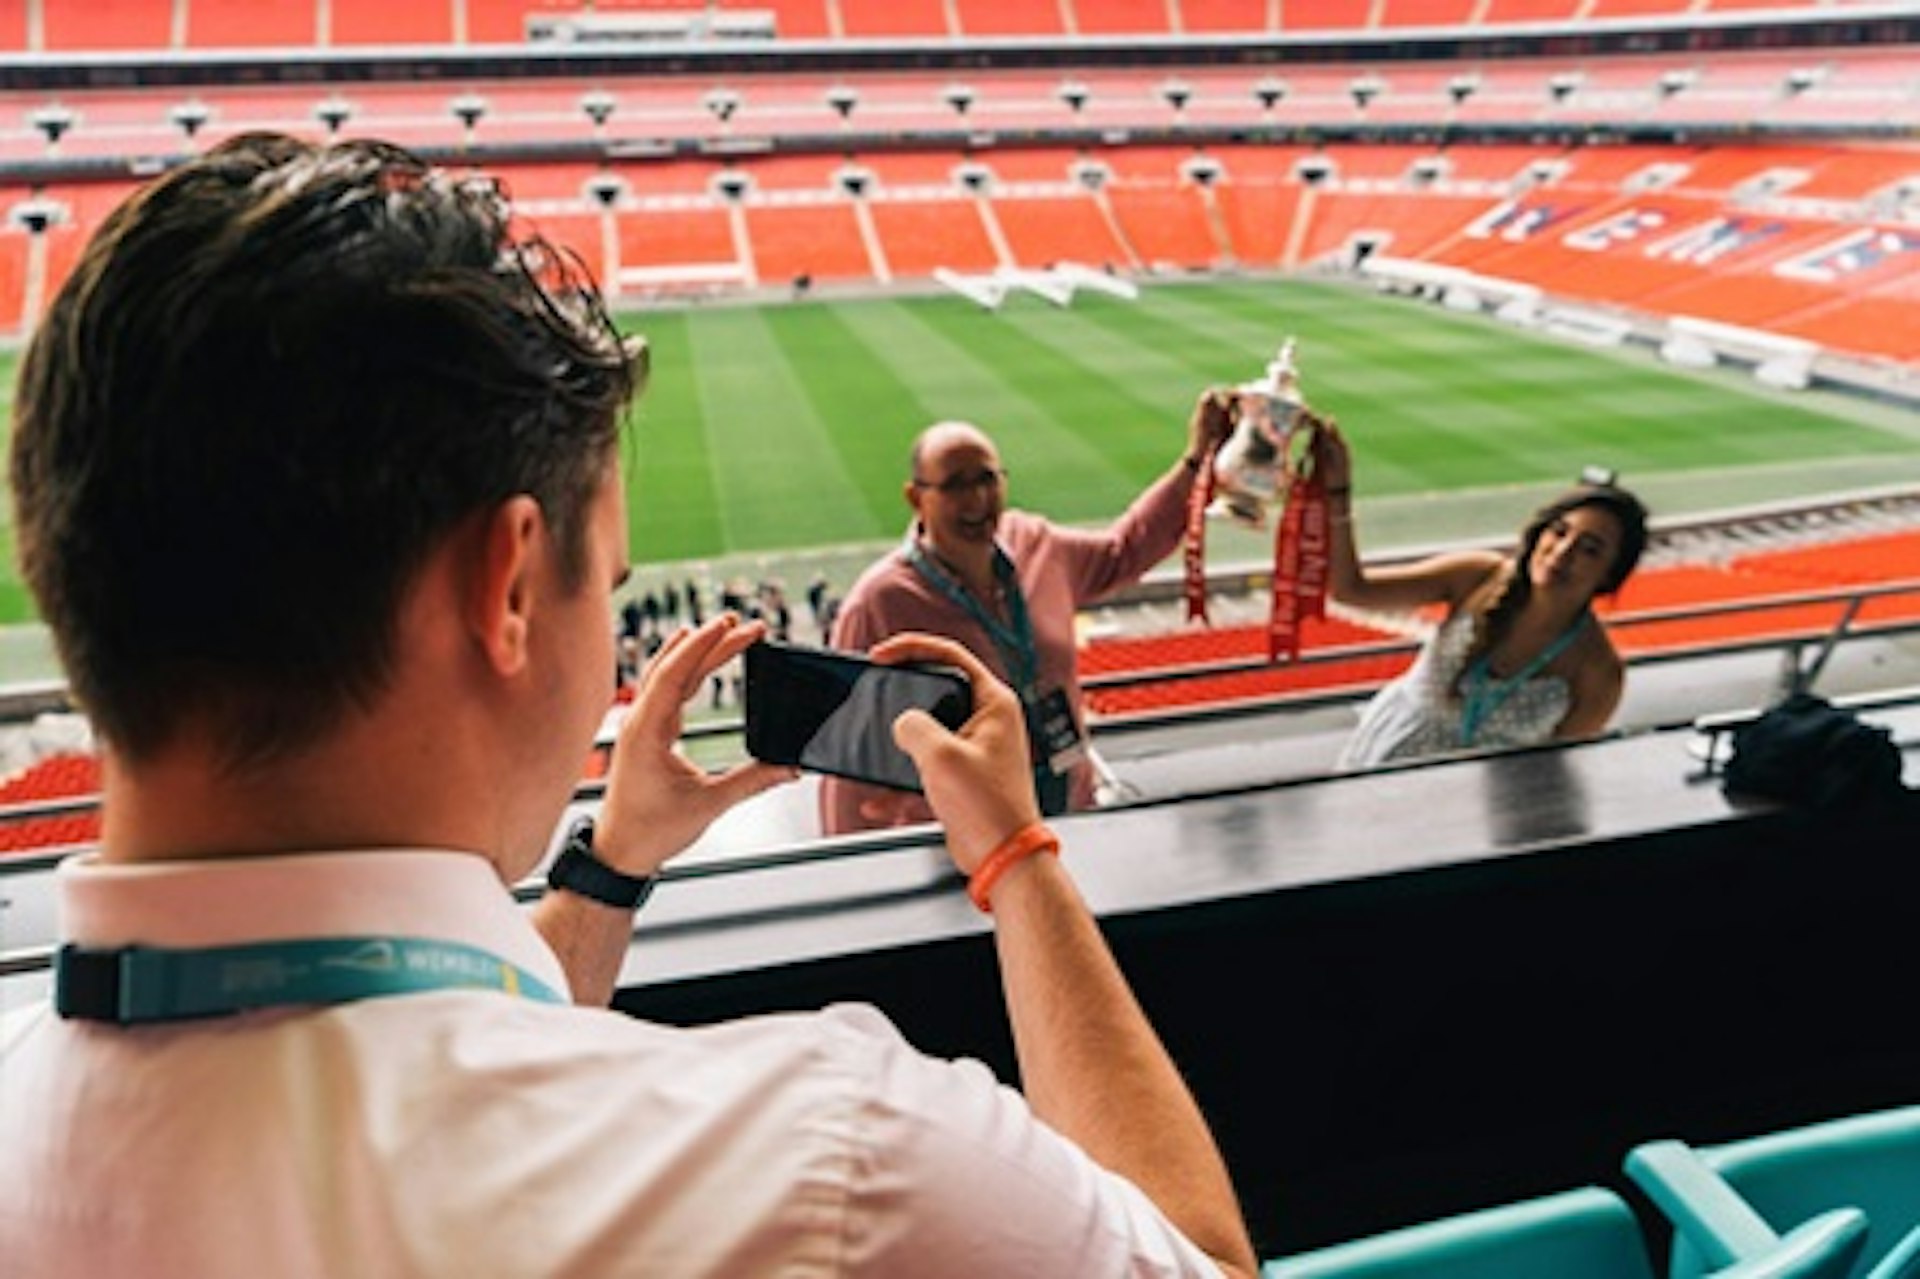 Wembley Stadium Tour for Two Adults 2